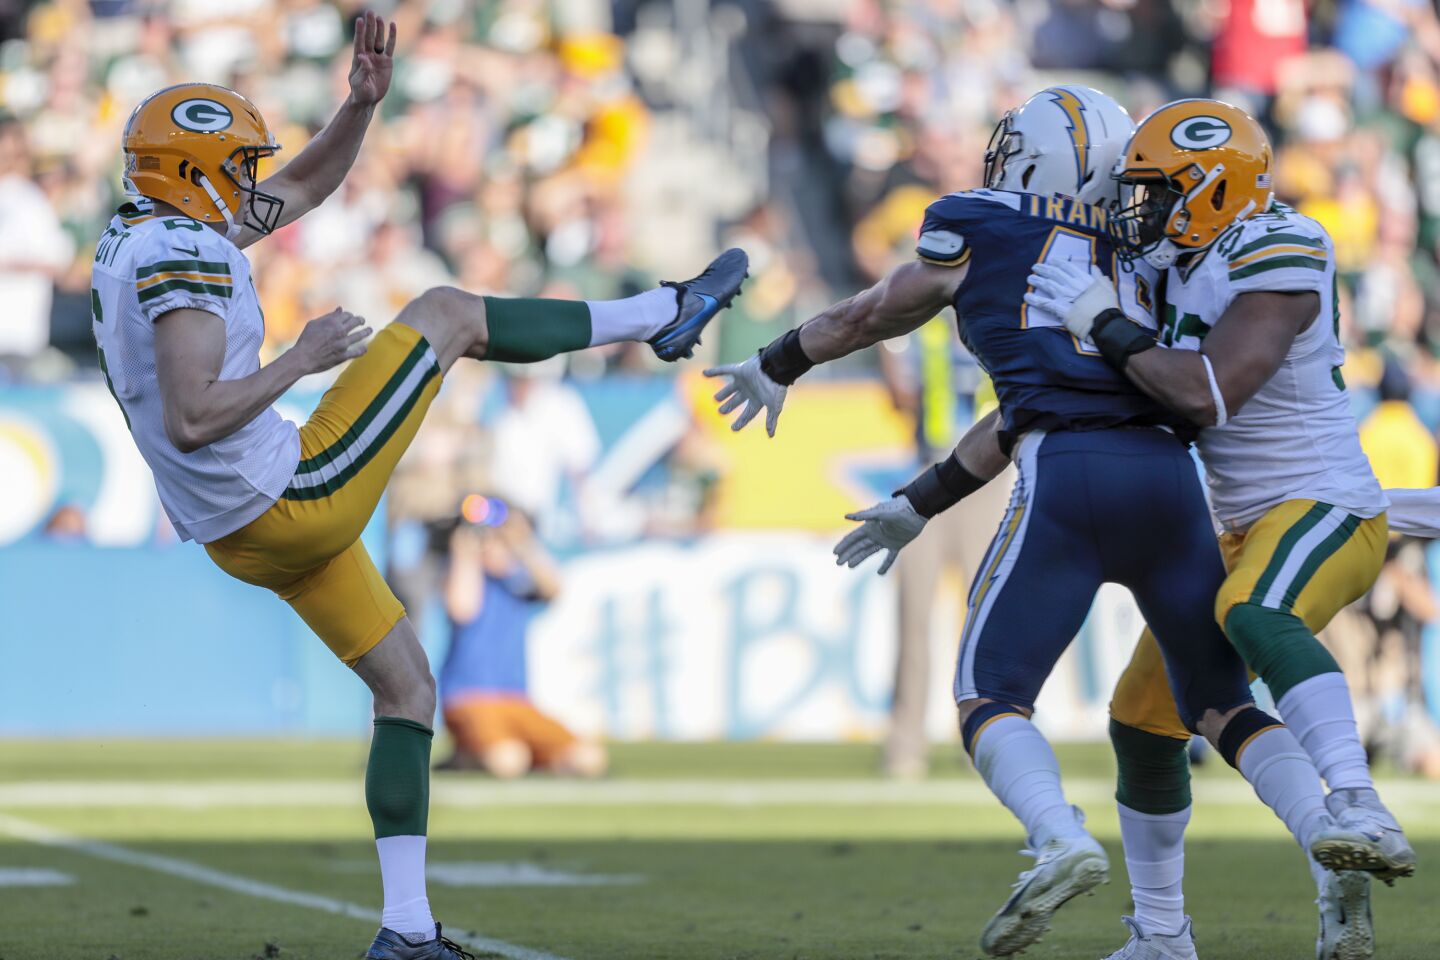 Chargers linebacker Drue Tranquill blocks a punt by the Packers' J.K. Scott.